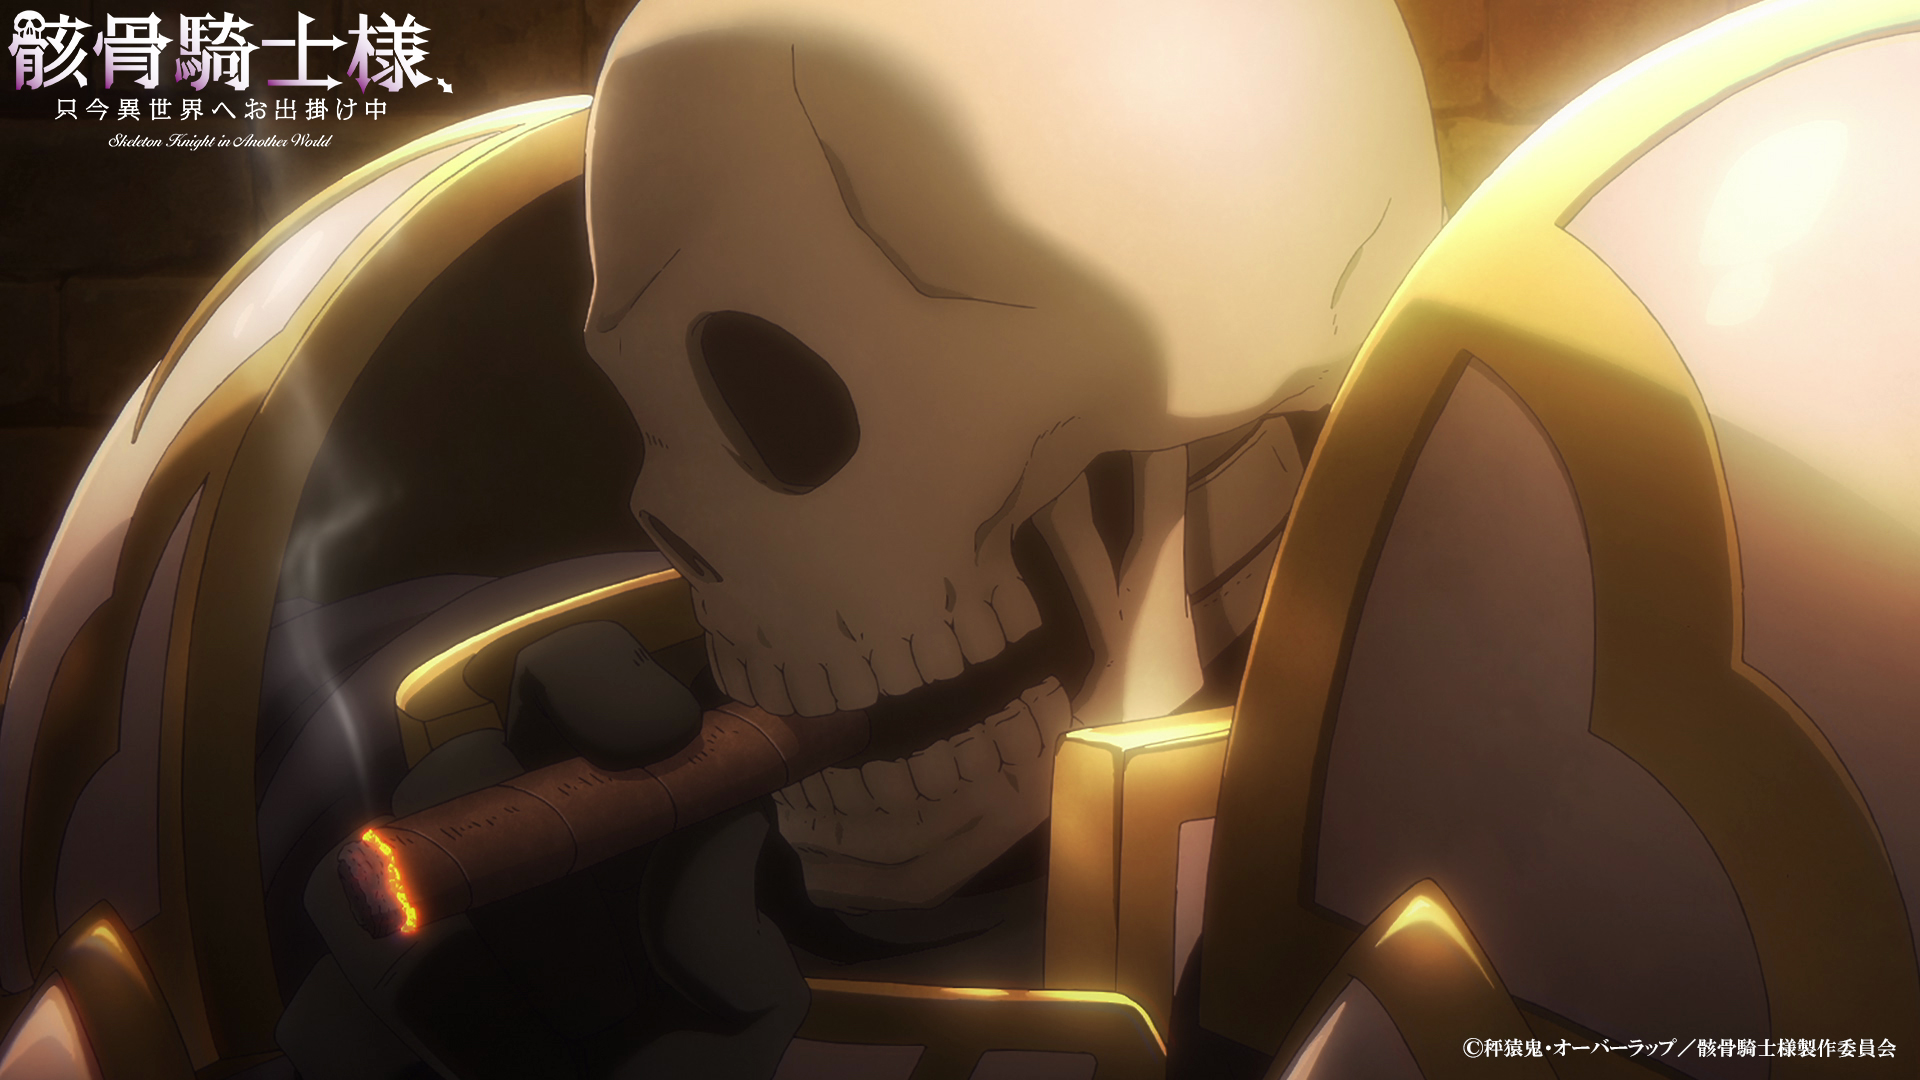 Skeleton Knight in Another World Gets TV Anime Adaptation!